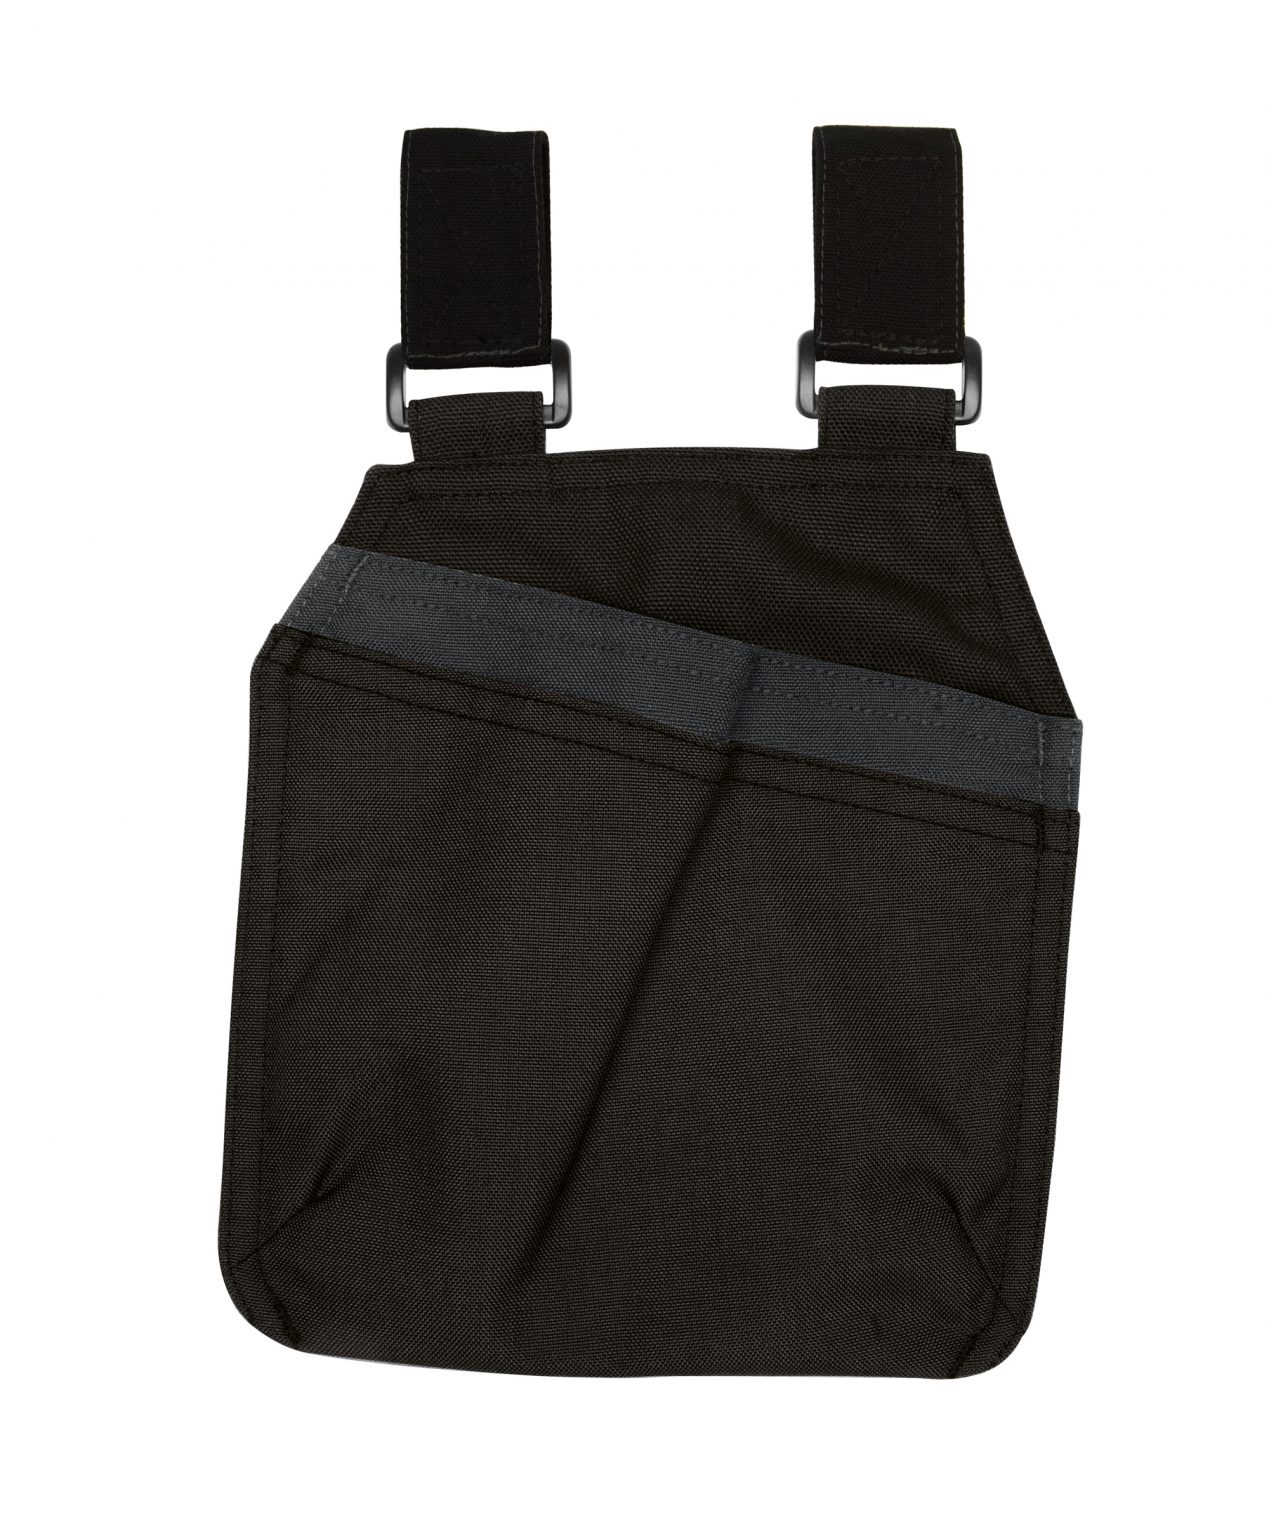 gordon with loops canvas tool pouches per pair with velcro loops black anthracite grey back